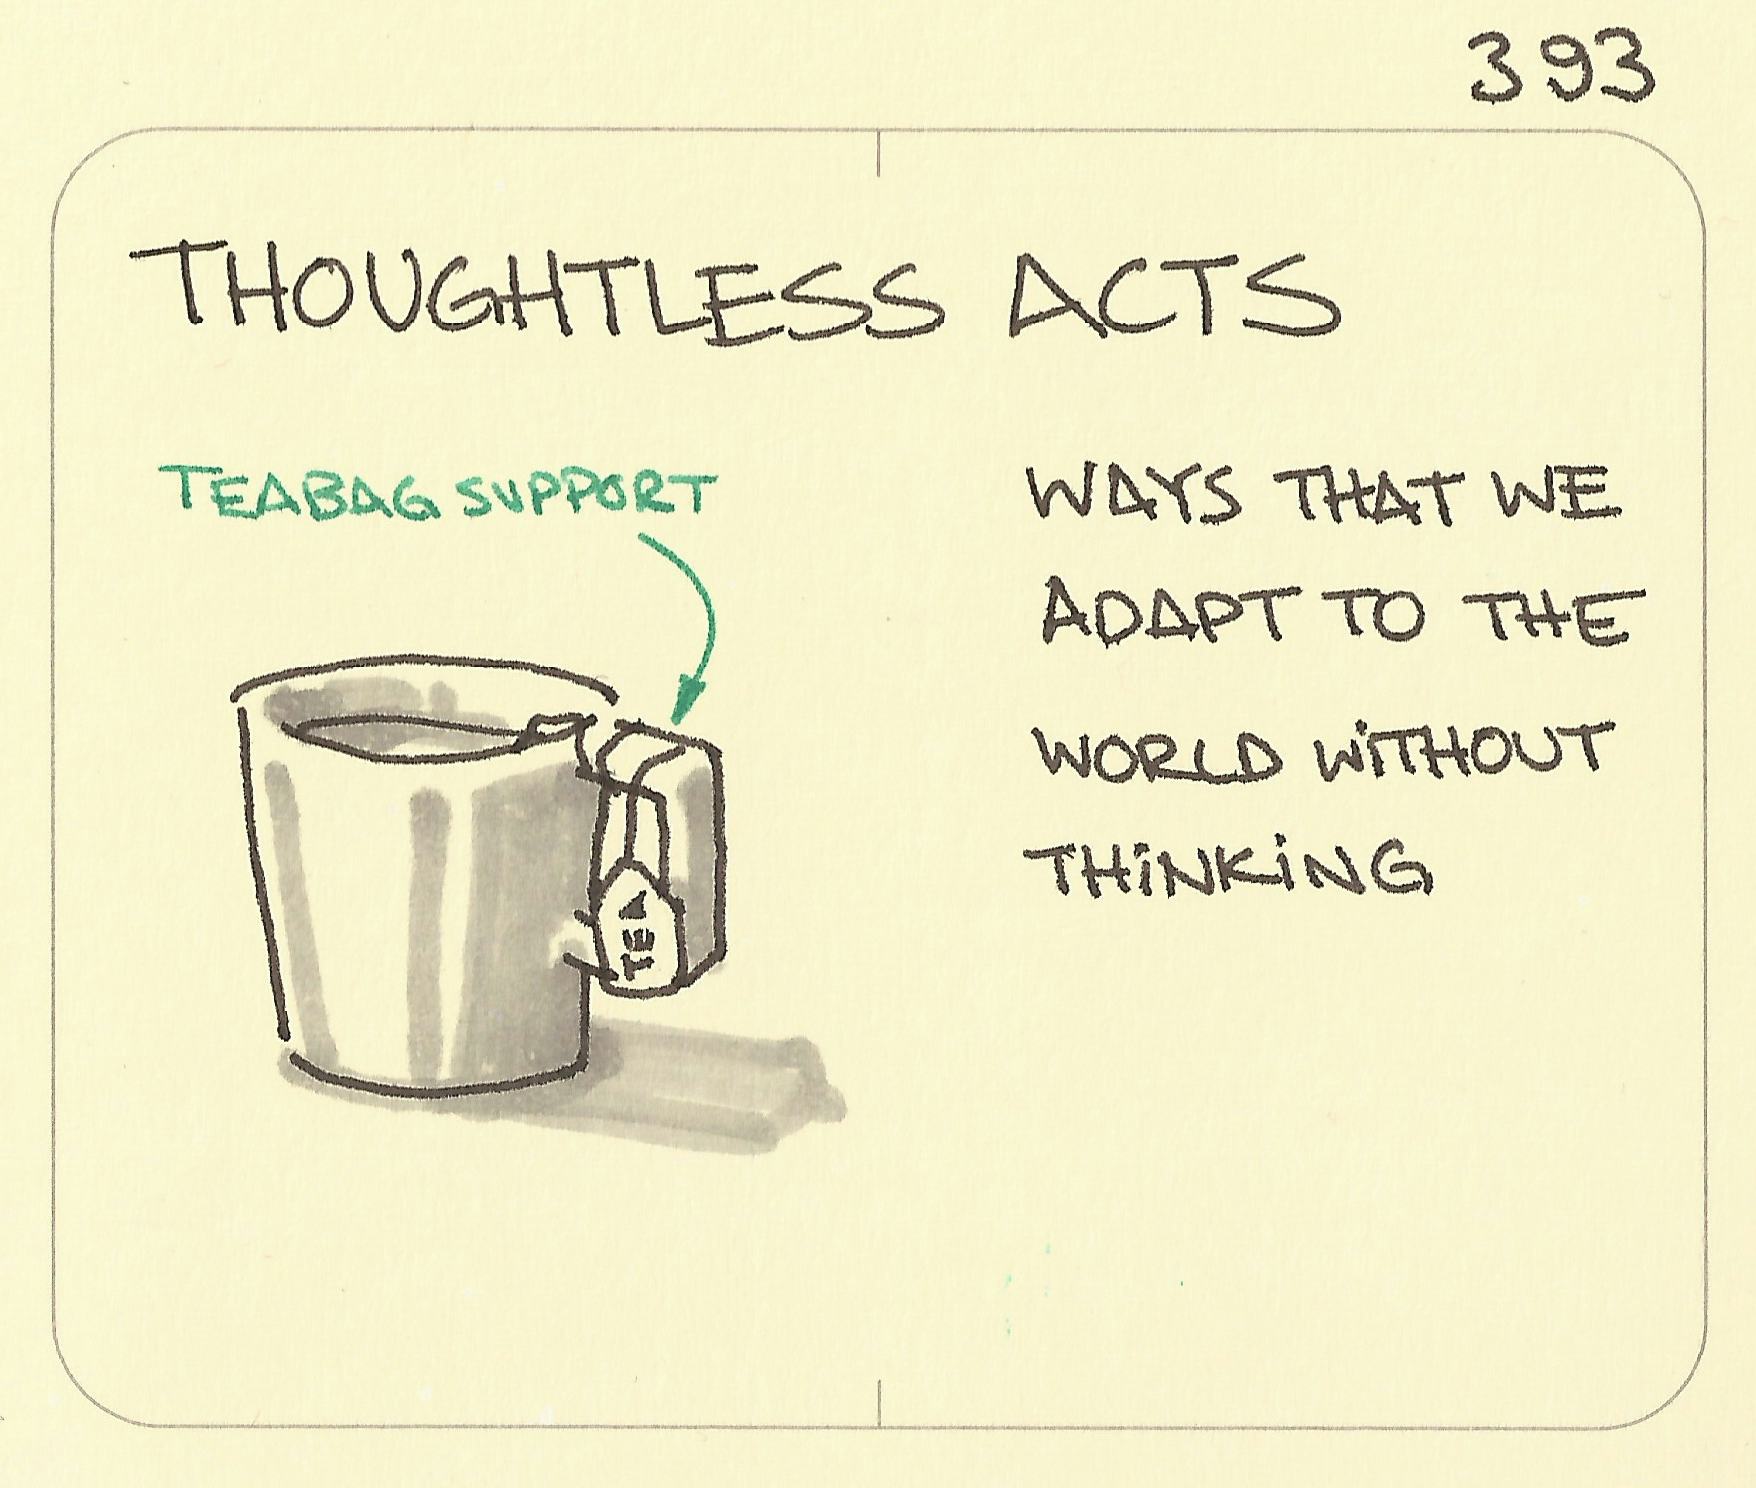 Thoughtless acts - Sketchplanations